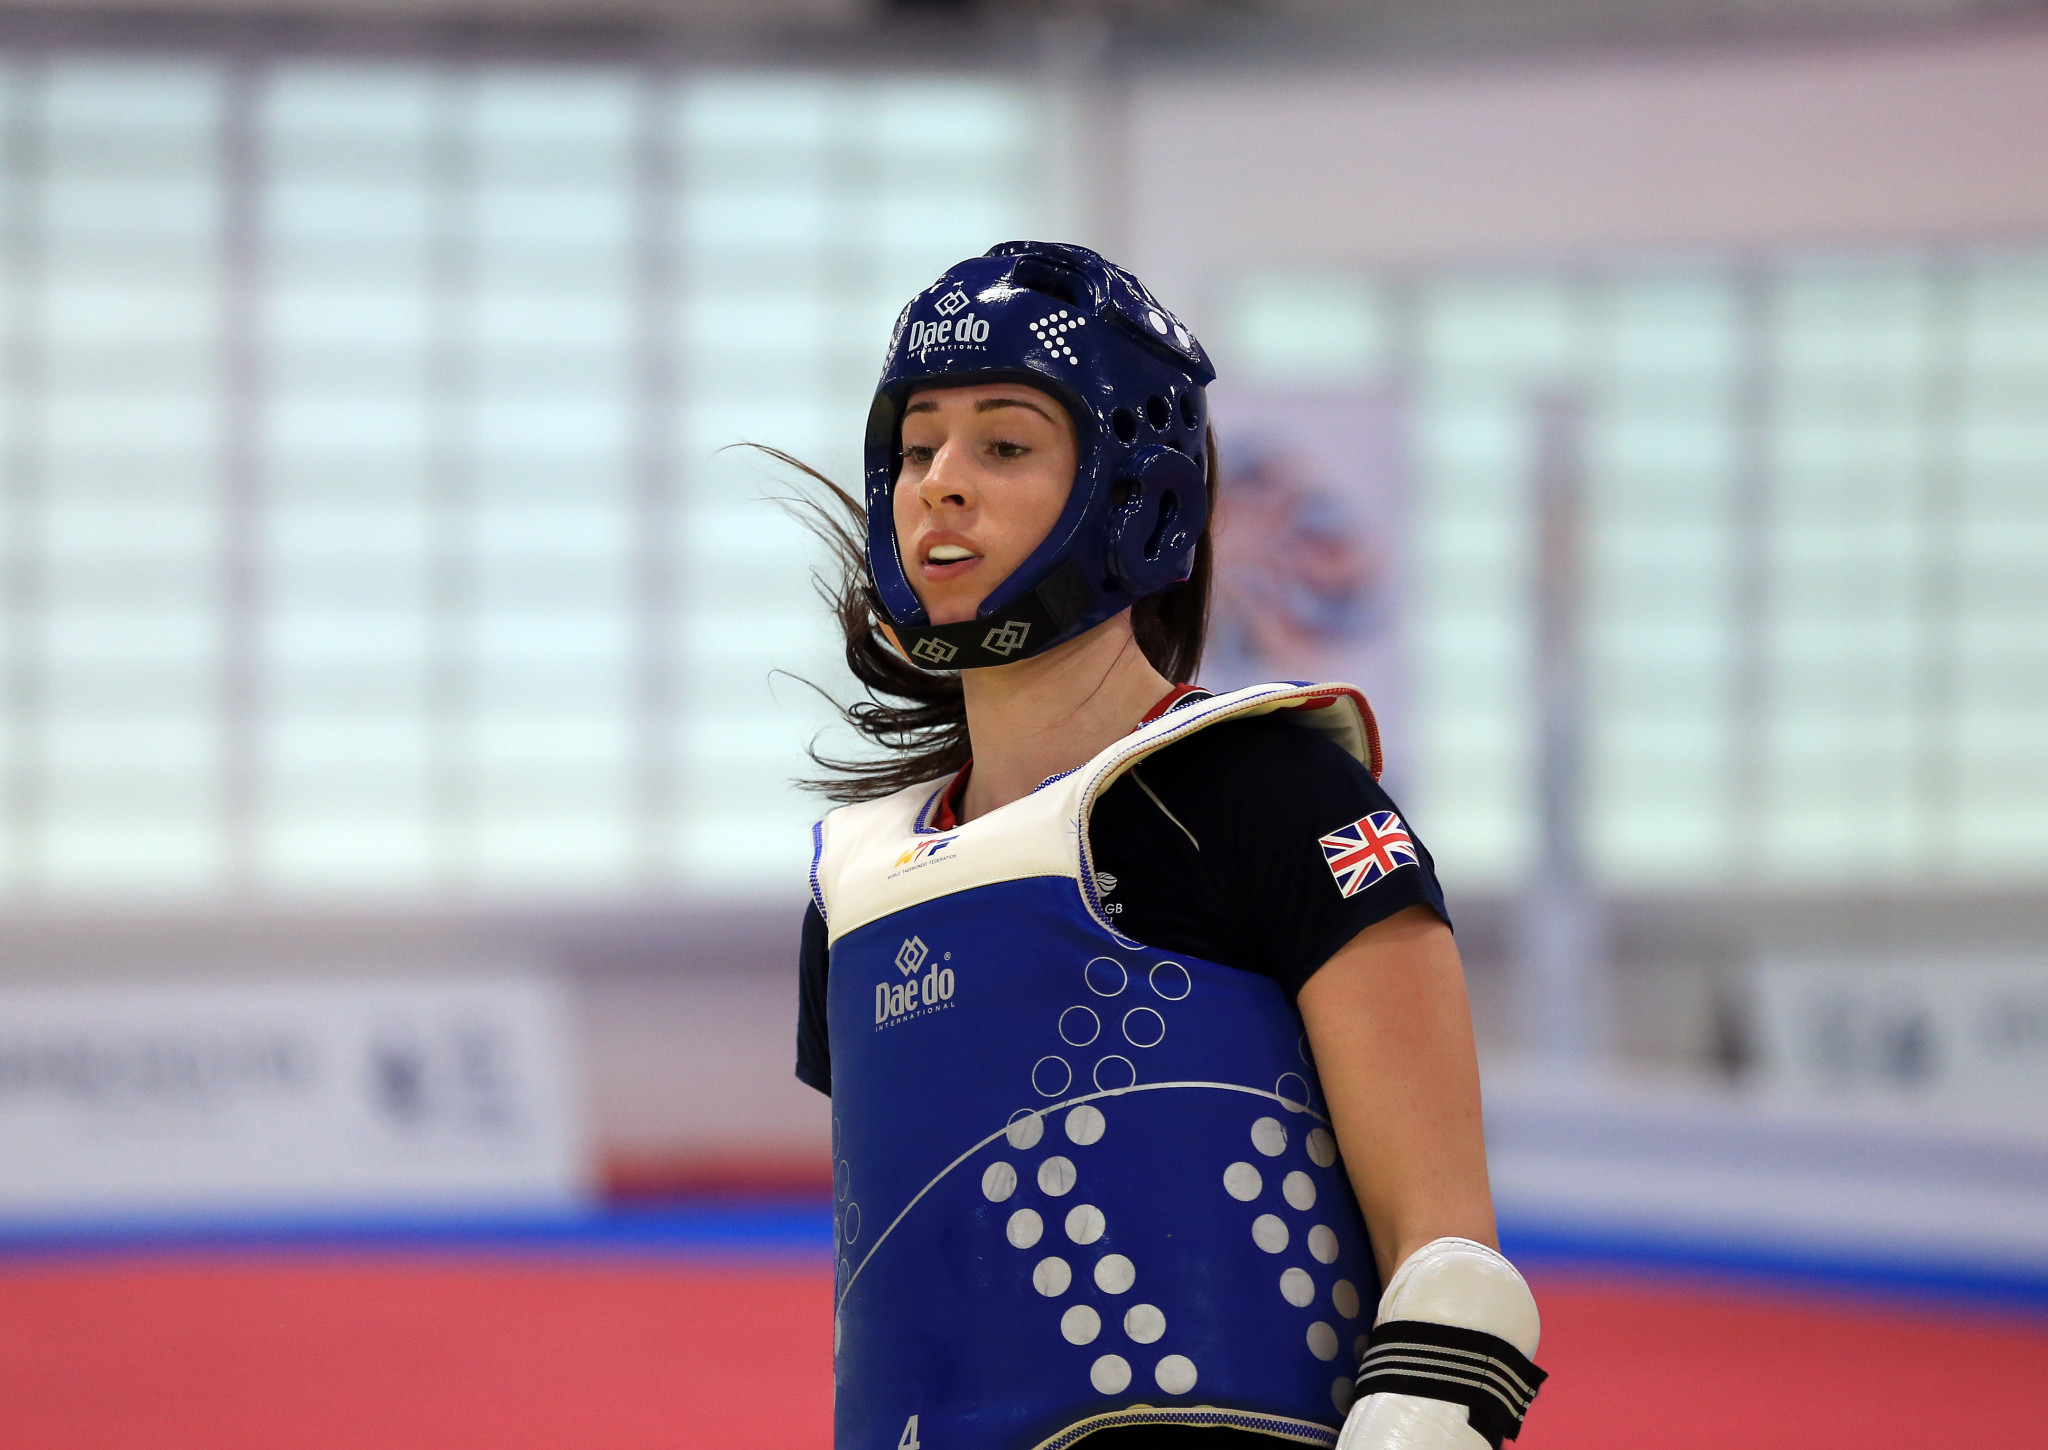 Britain scoop two golds as World Taekwondo Grand Prix debuts in Africa